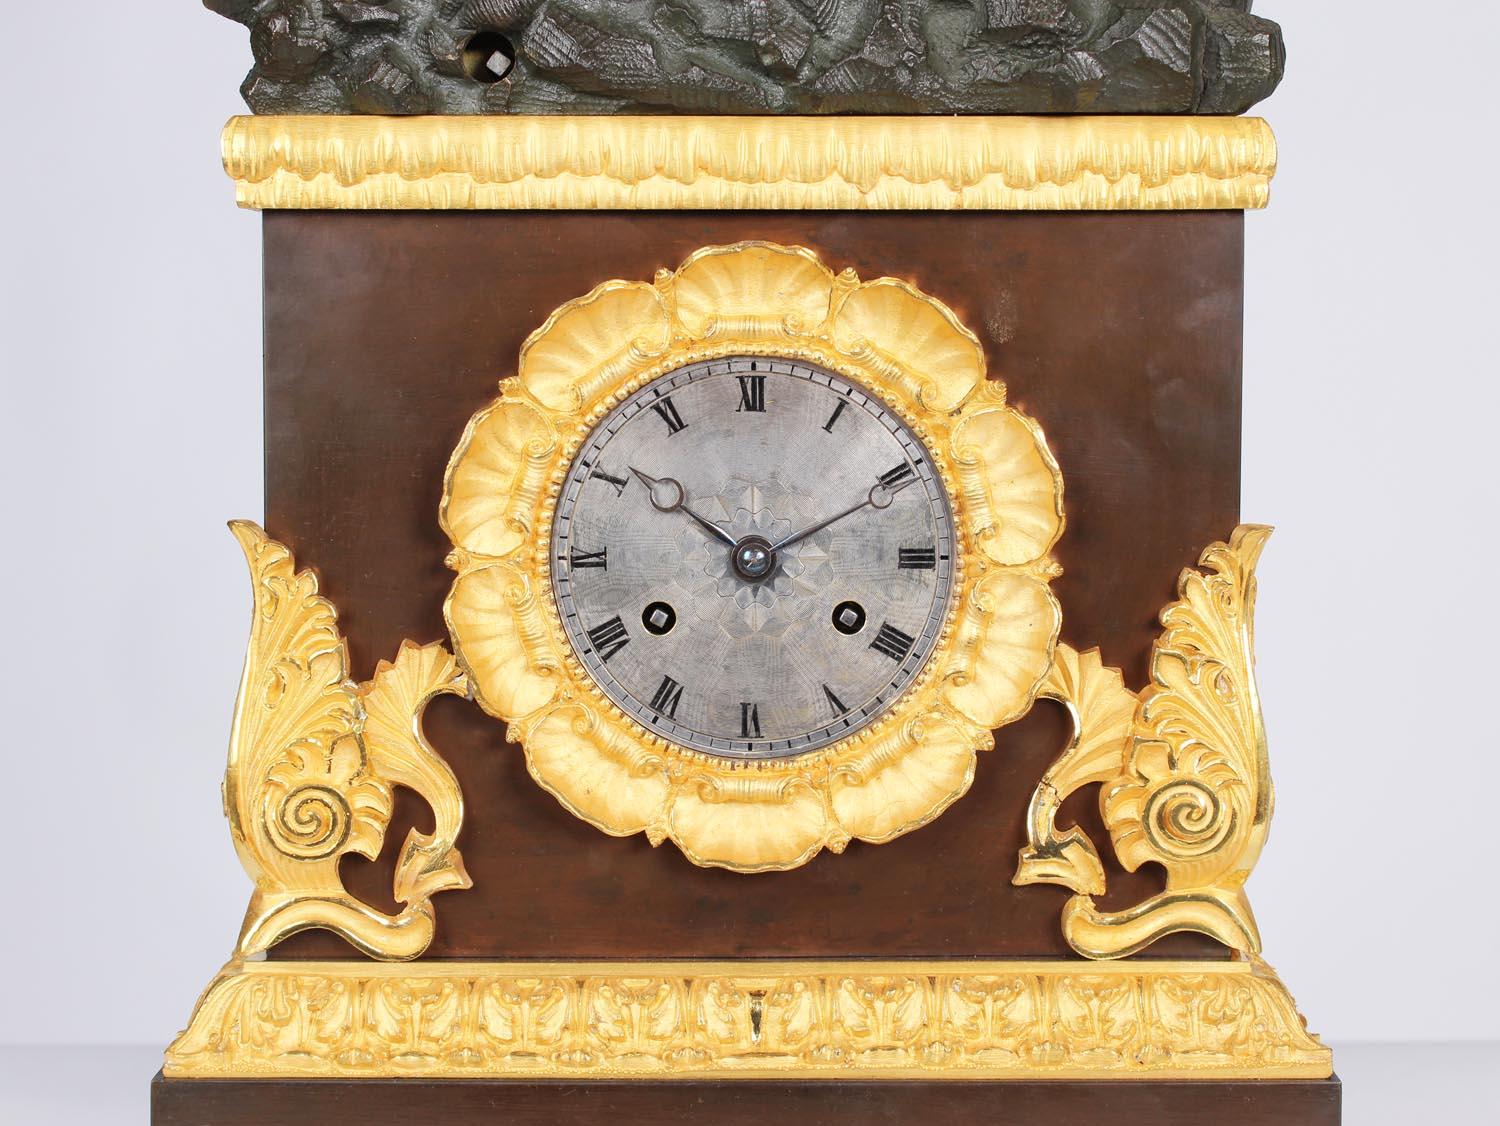 Mid-19th Century French Mantel Clock, Pendule with Moving Sailboat Automat, Charles X, circa 1840